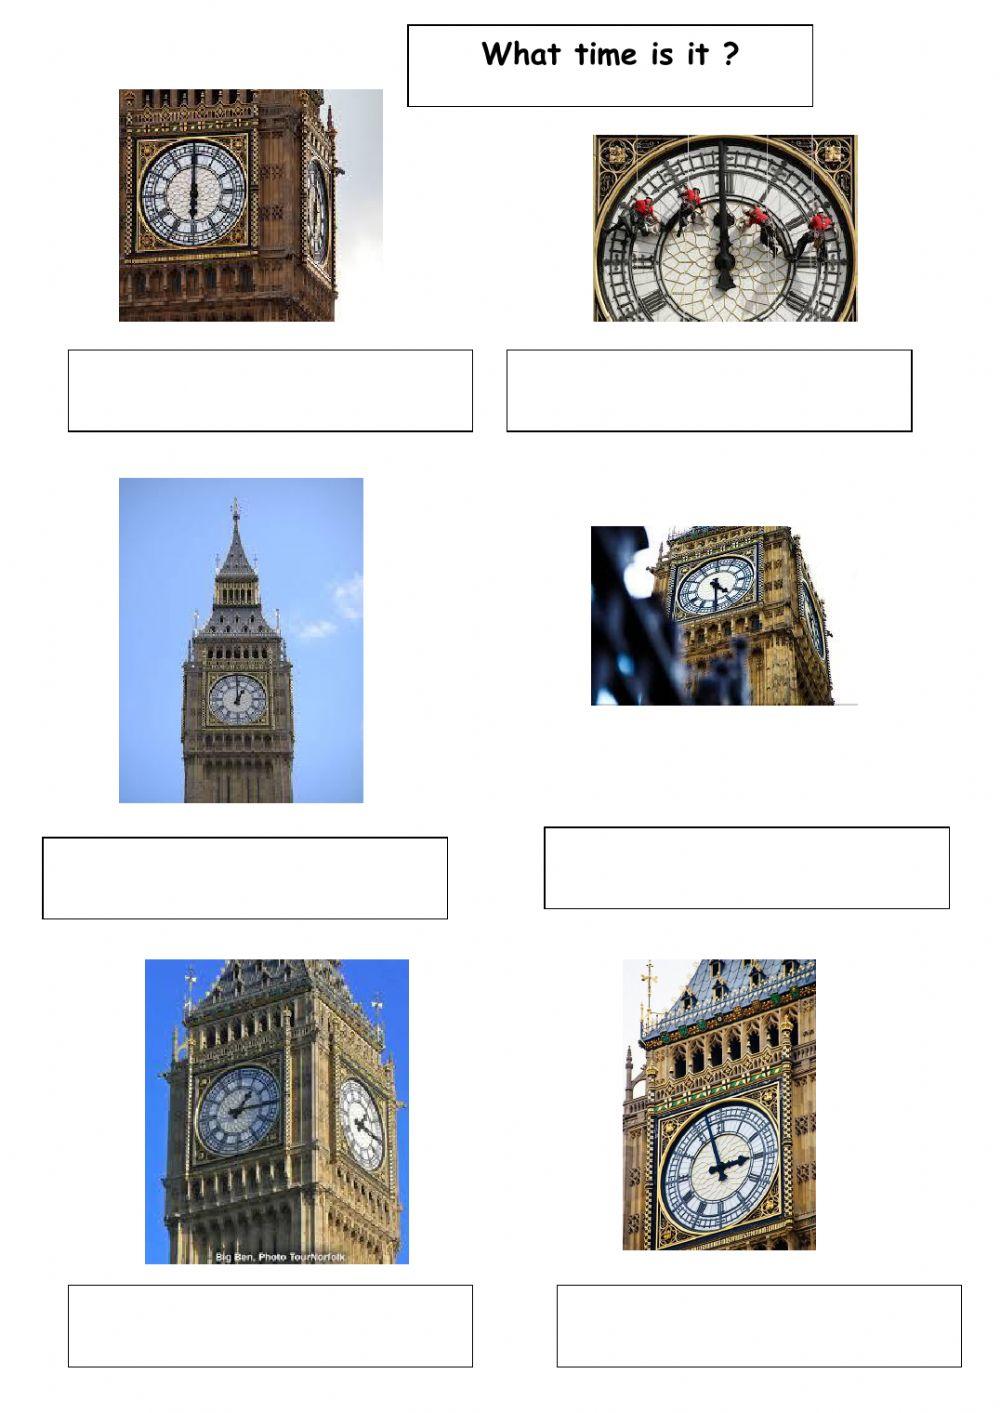 What time is it on Big Ben Clock Tower?